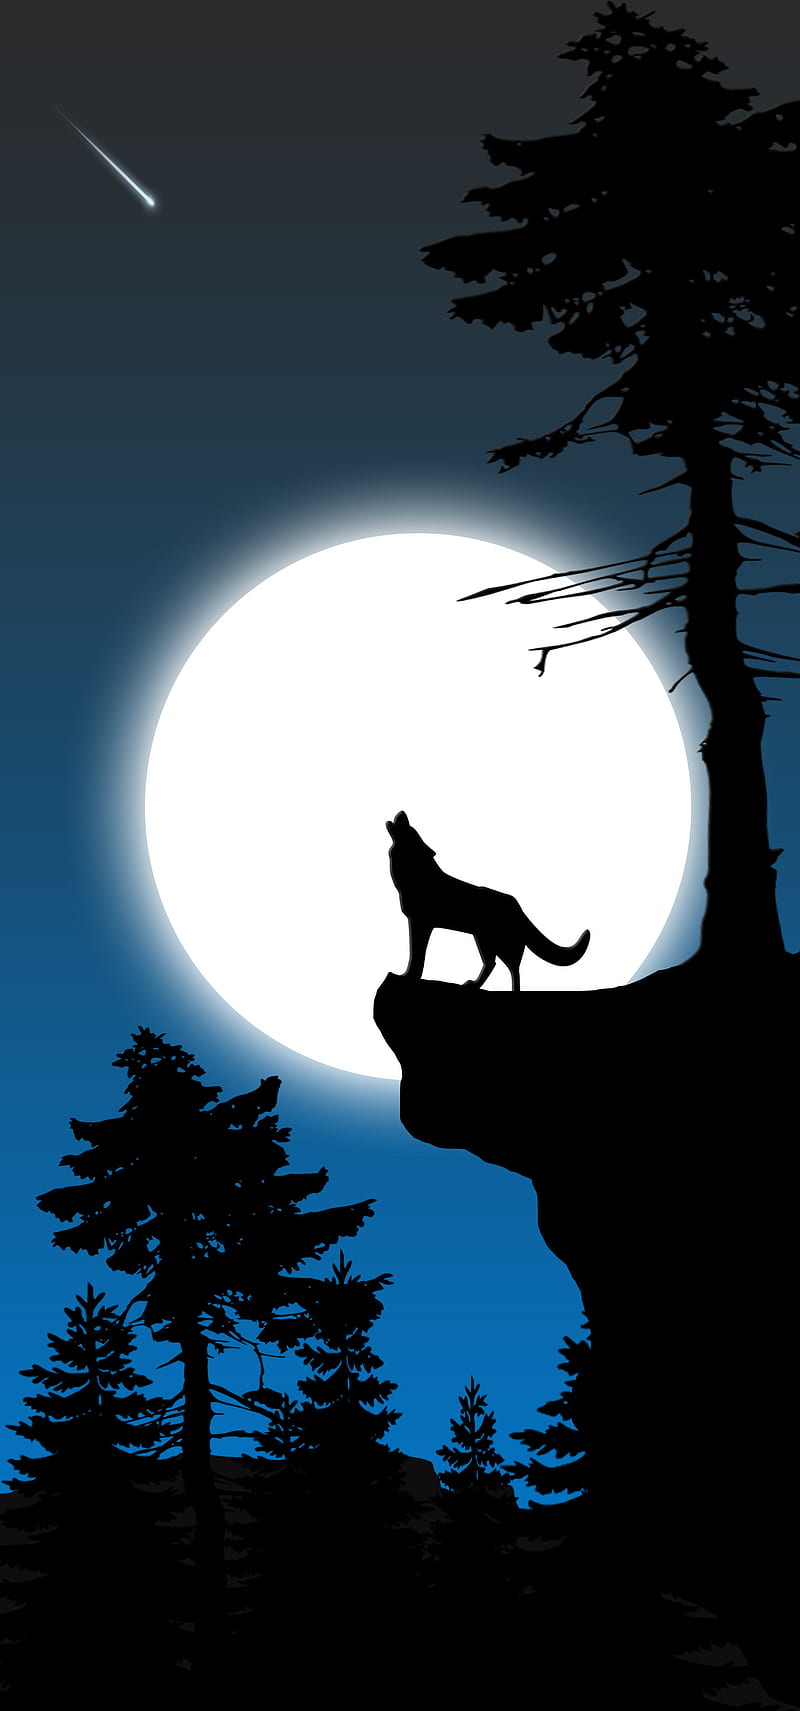 Howling at the moon - Wolf